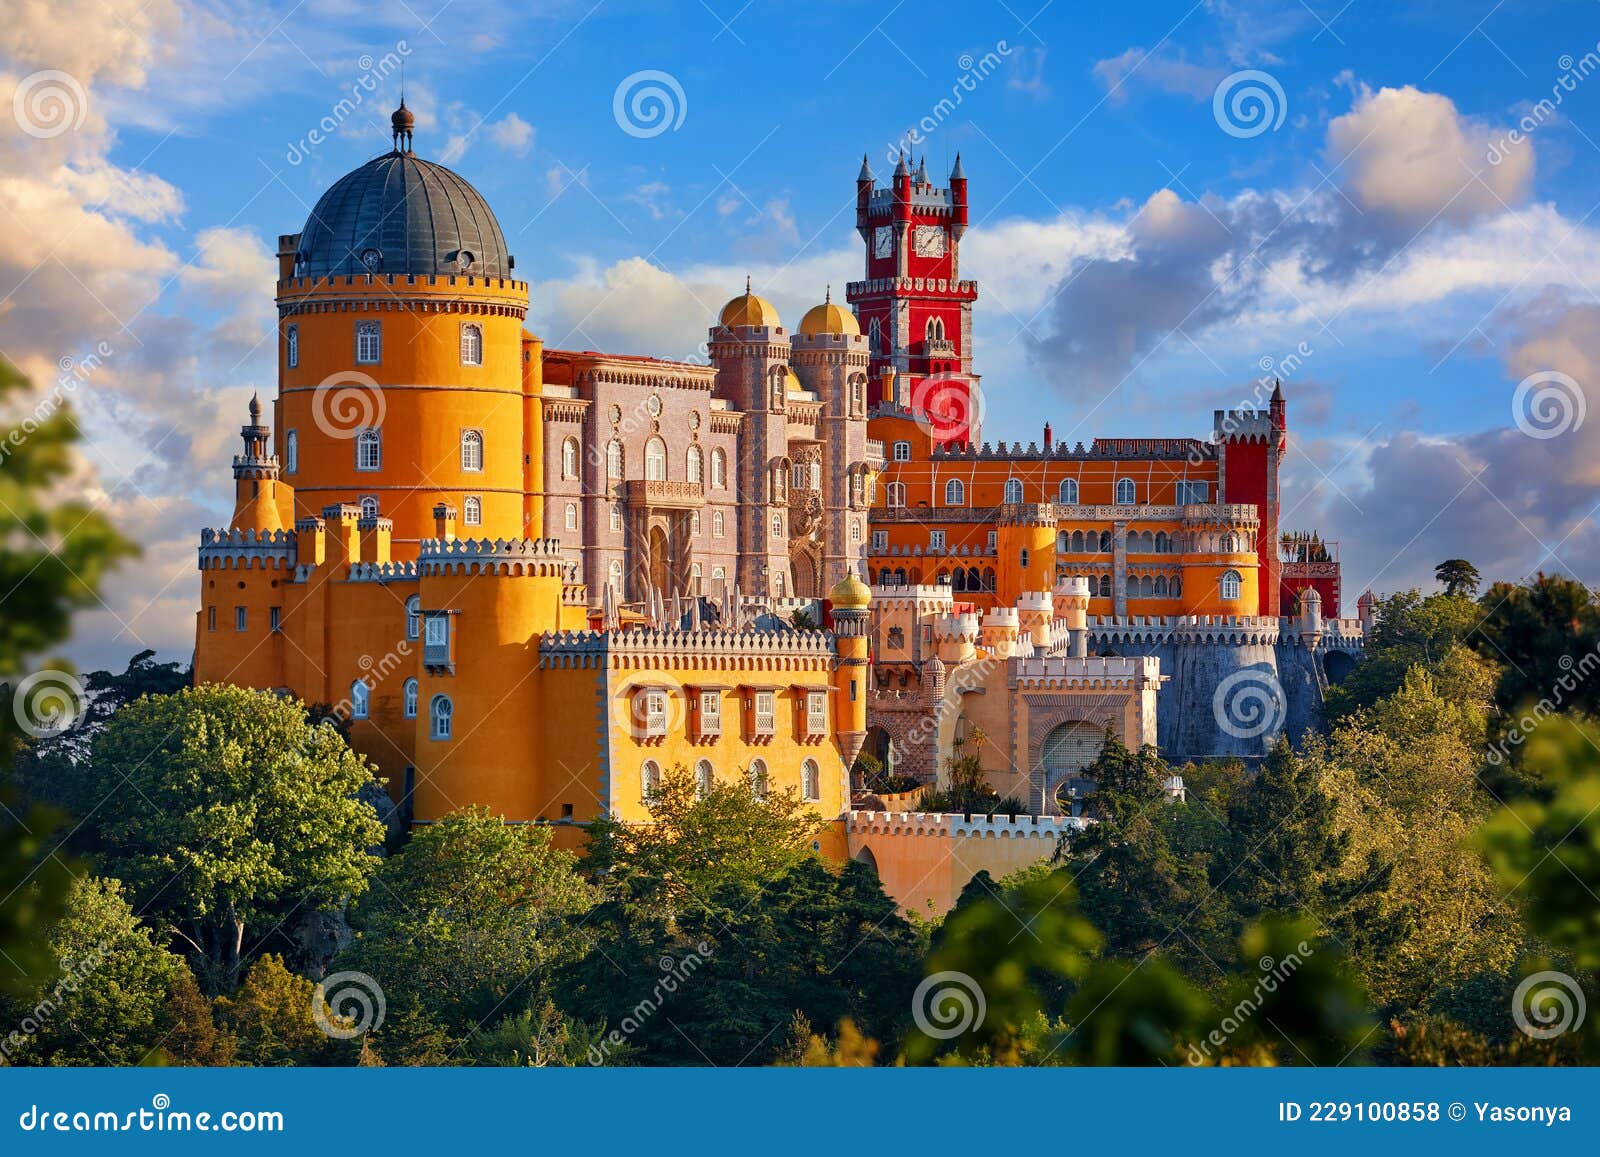 palace of pena in sintra. lisbon, portugal.